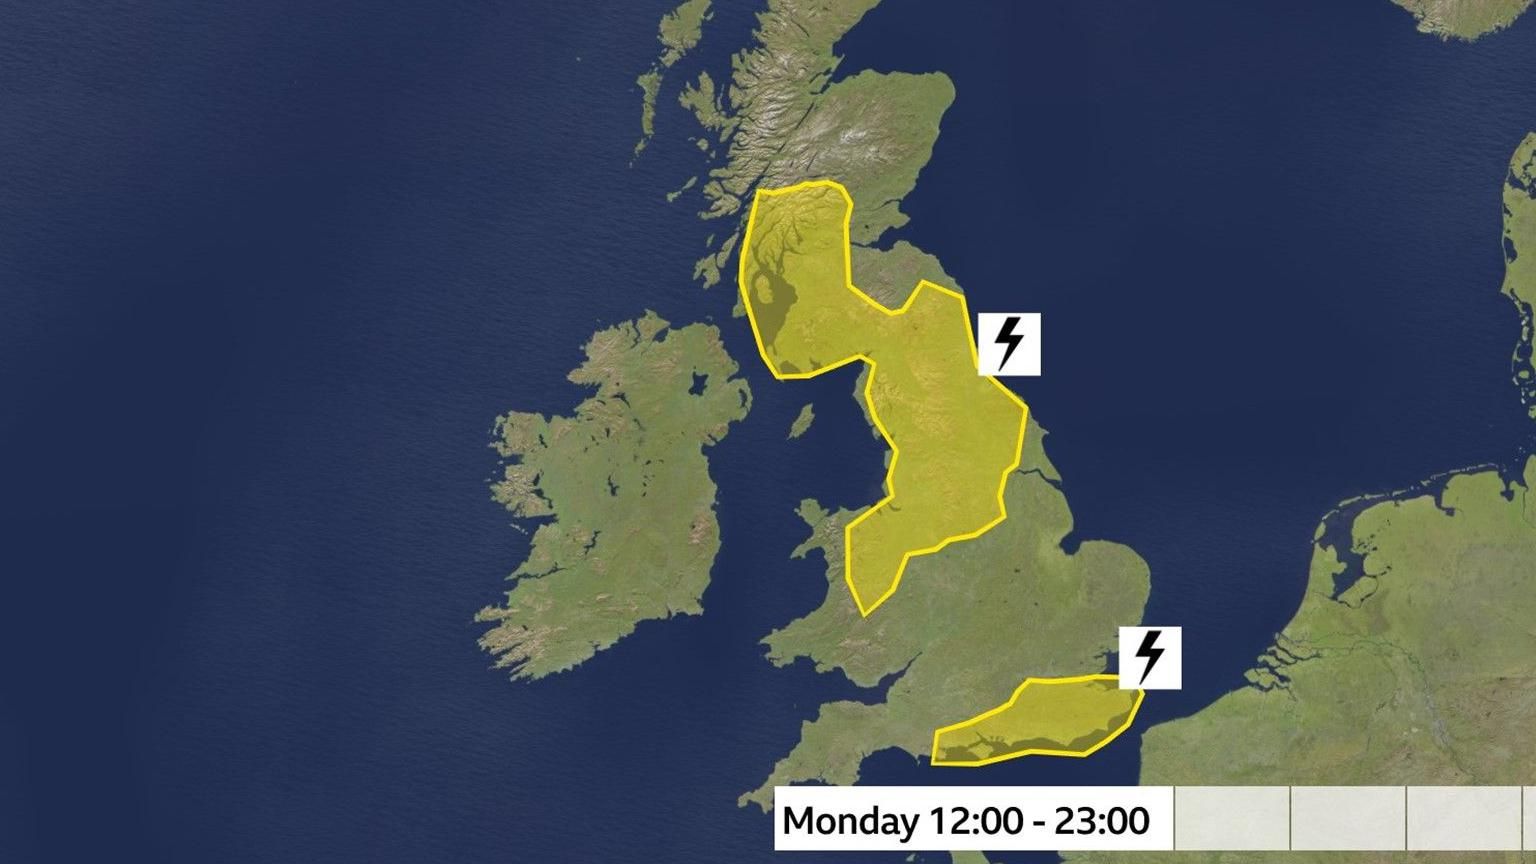 A weather map of the UK shows two Met Office weather alerts.